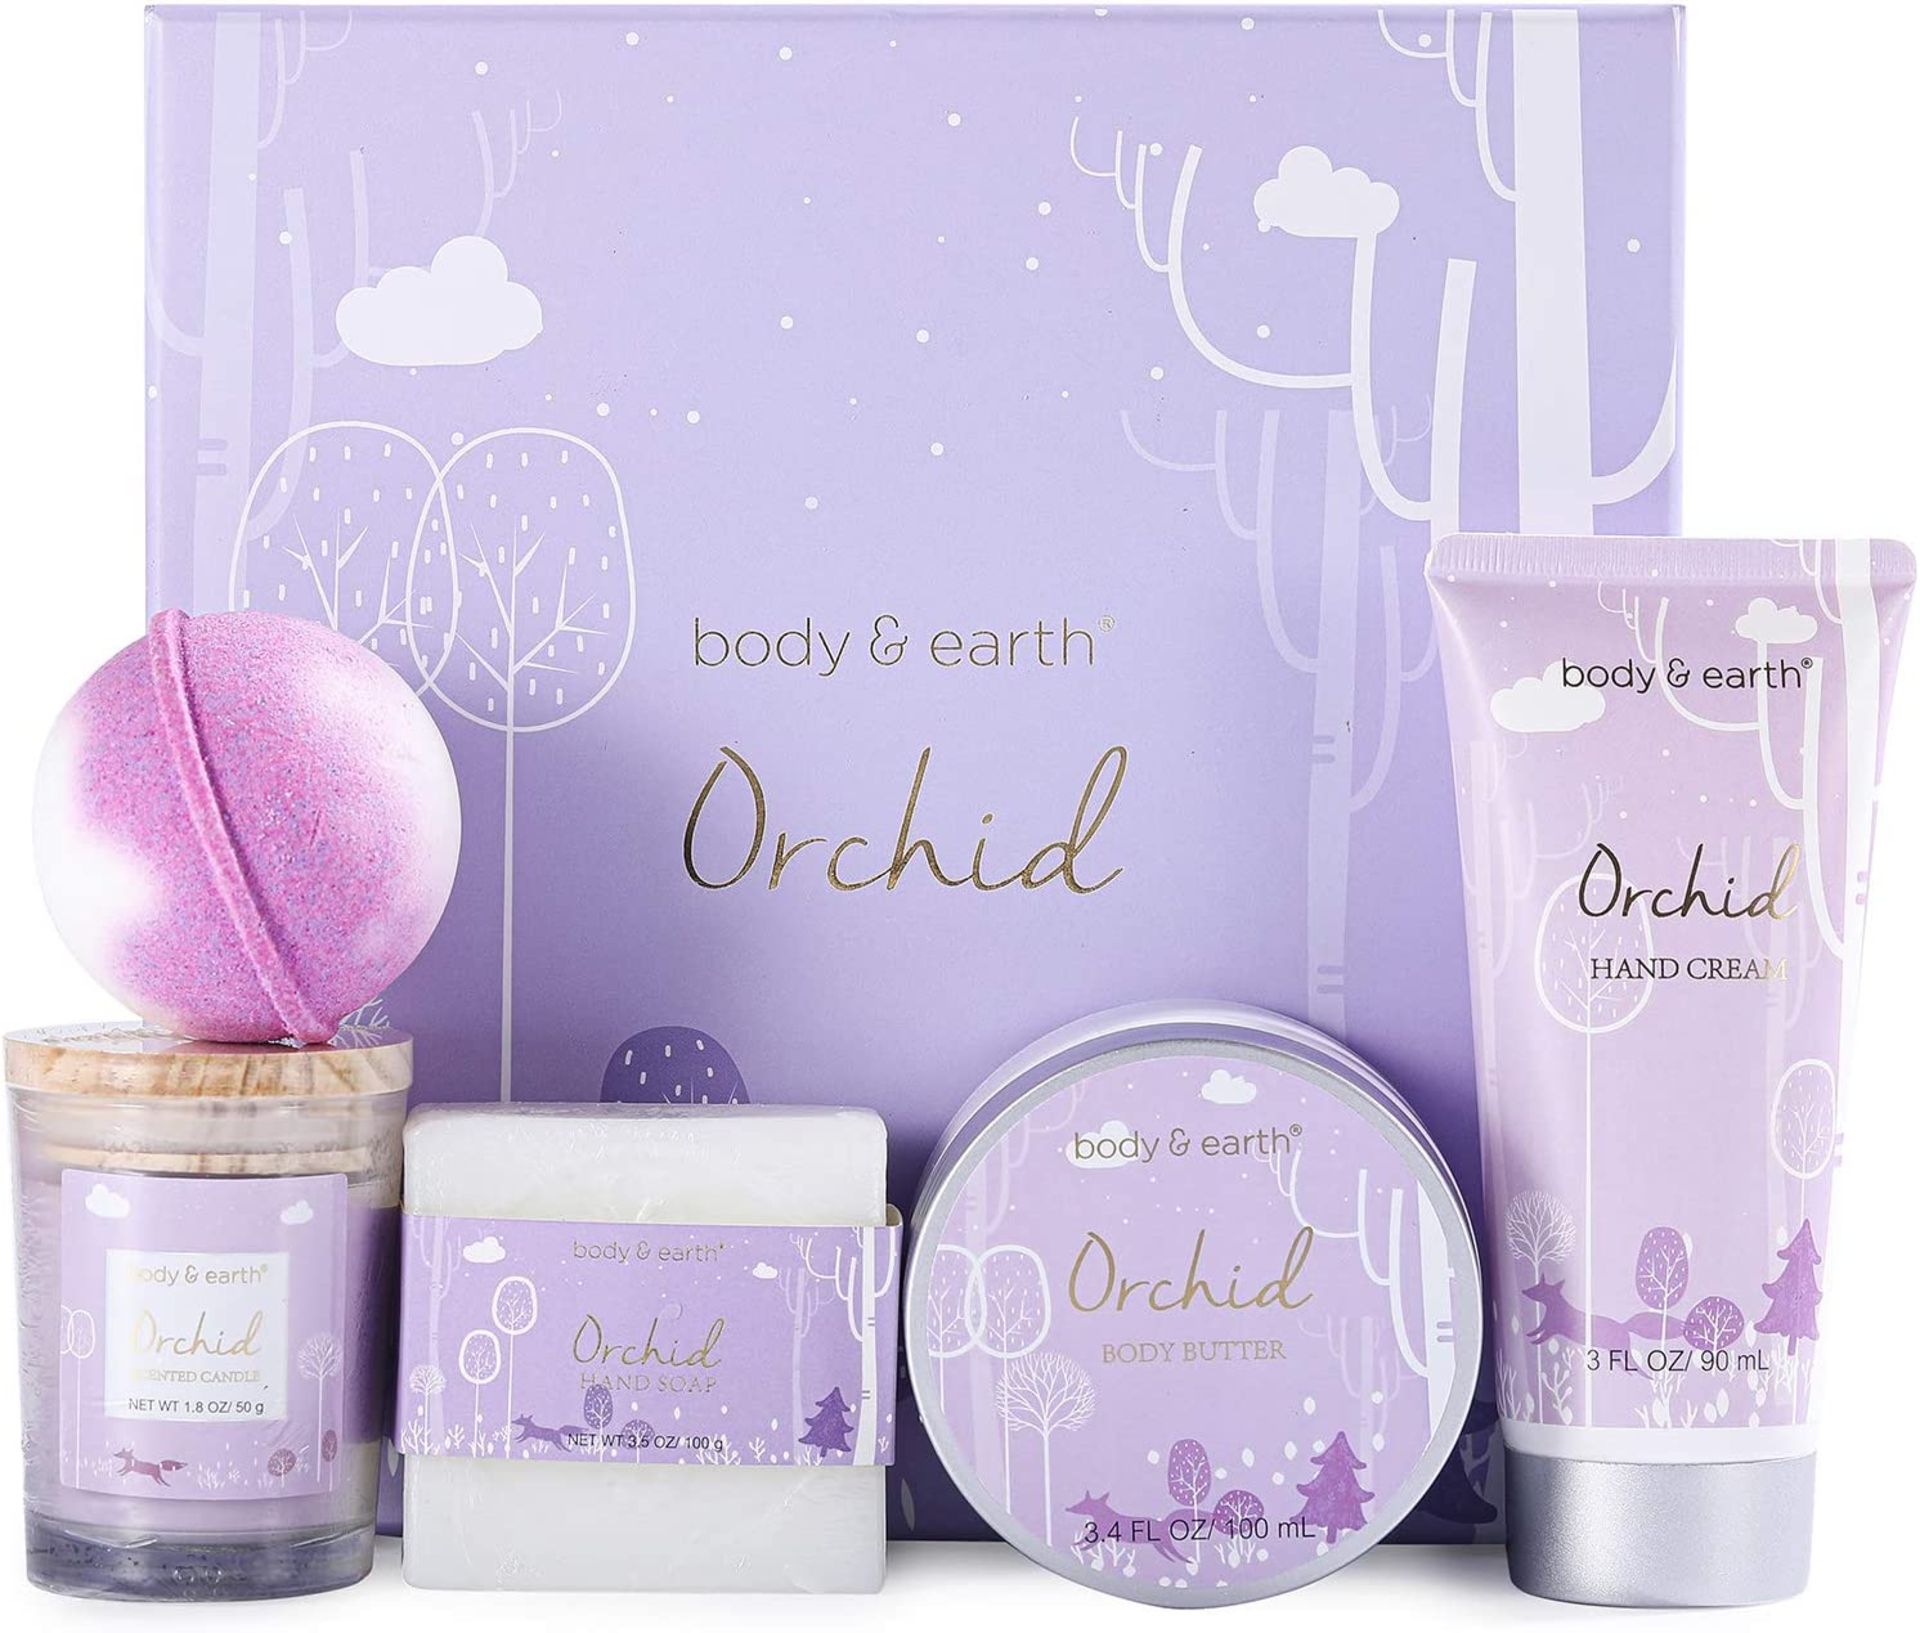 Body & Earth Pamper Gifts for Women, 5 Pcs Orchid Bath Spa Gift Set